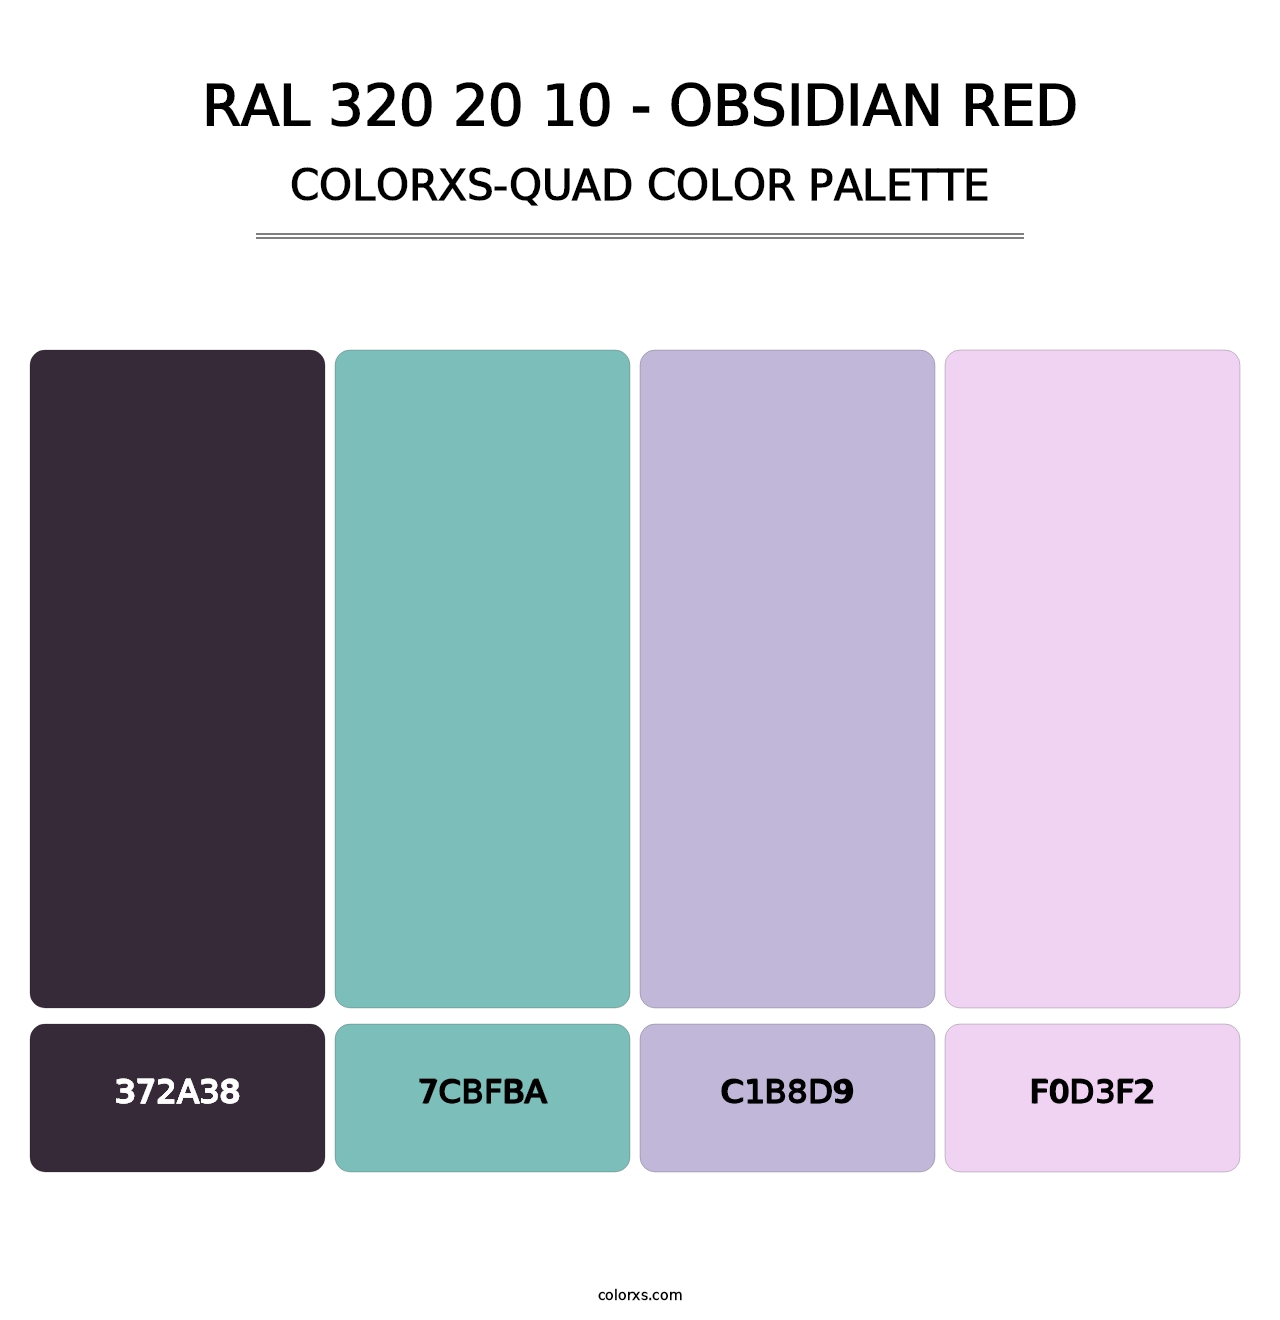 RAL 320 20 10 - Obsidian Red - Colorxs Quad Palette